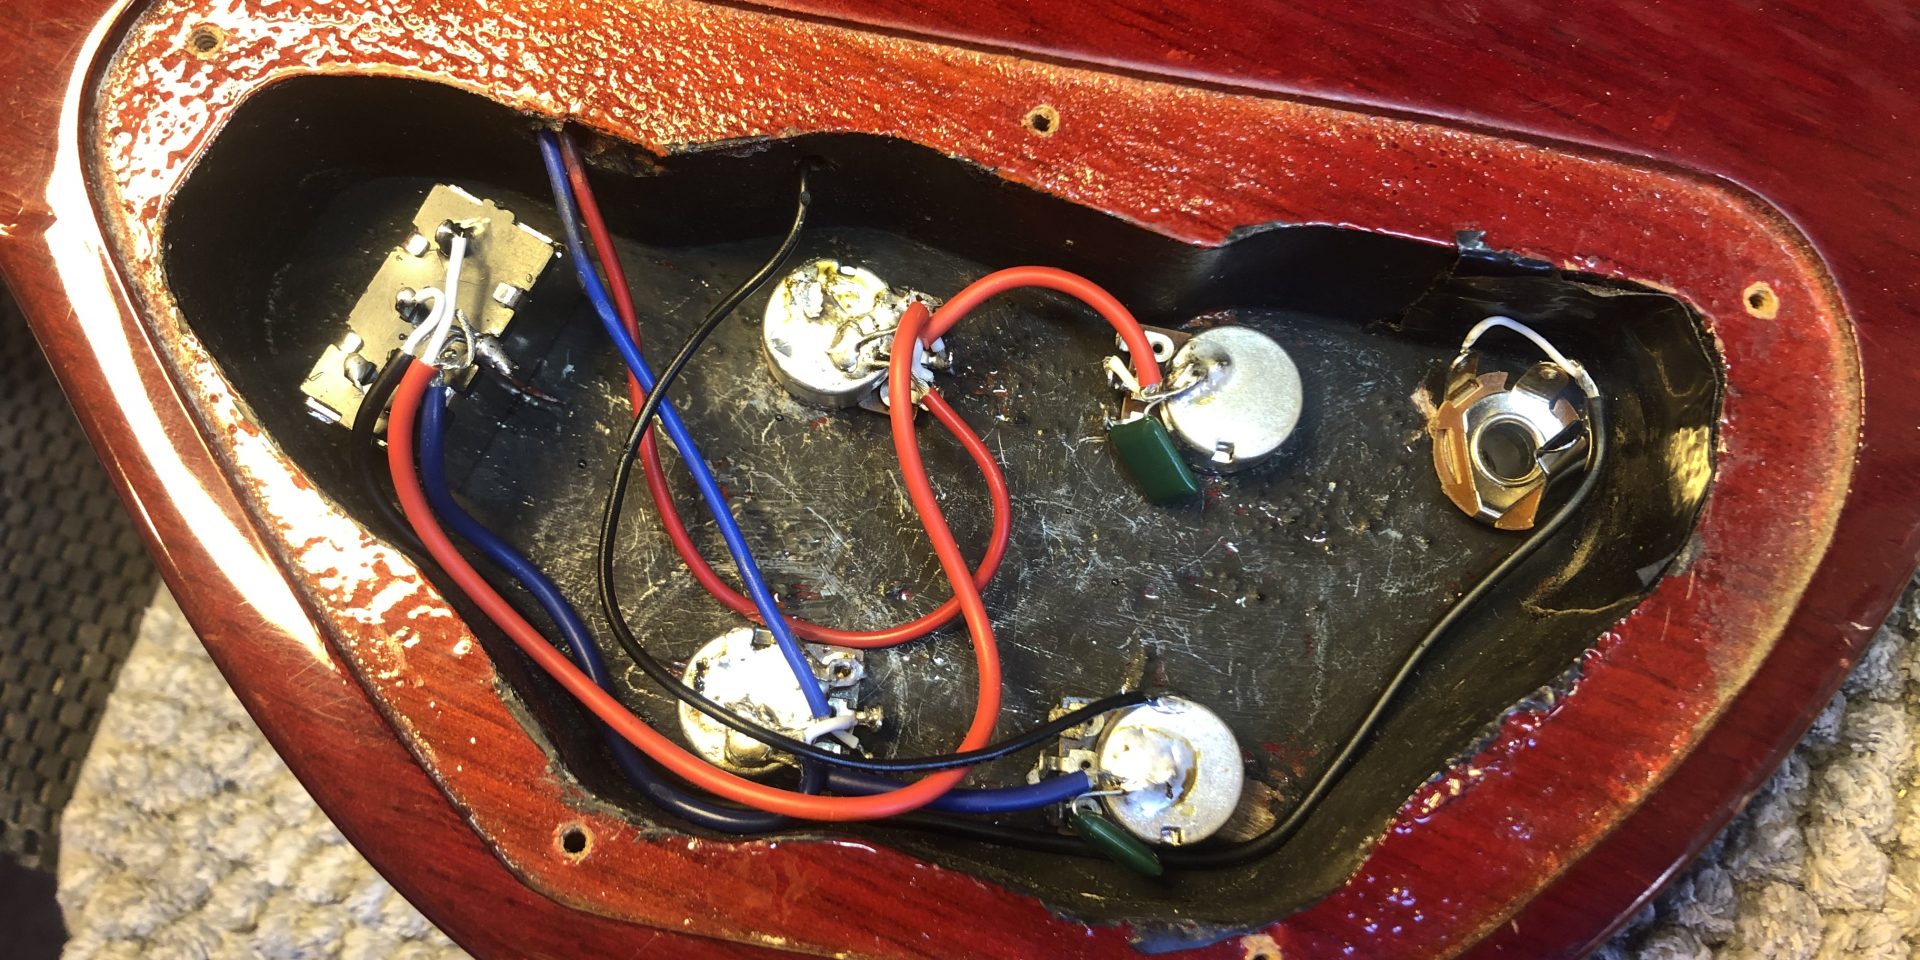 how to wire epiphone casino